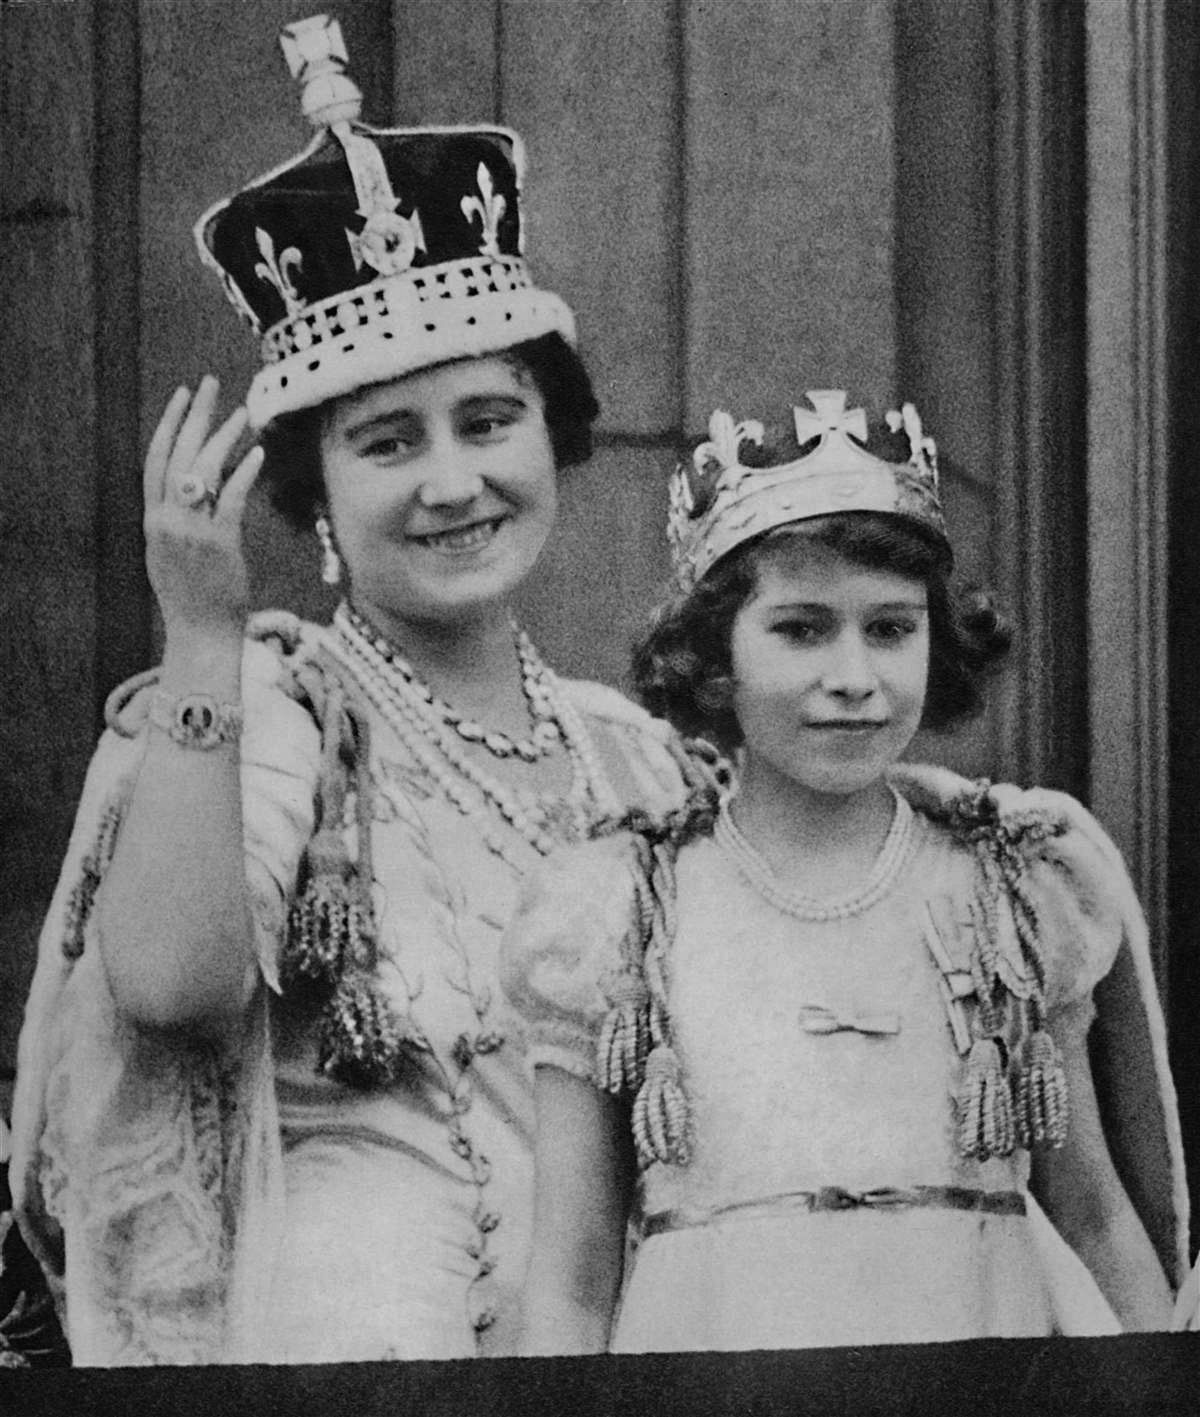 The Queen Mother and Princess Elizabeth